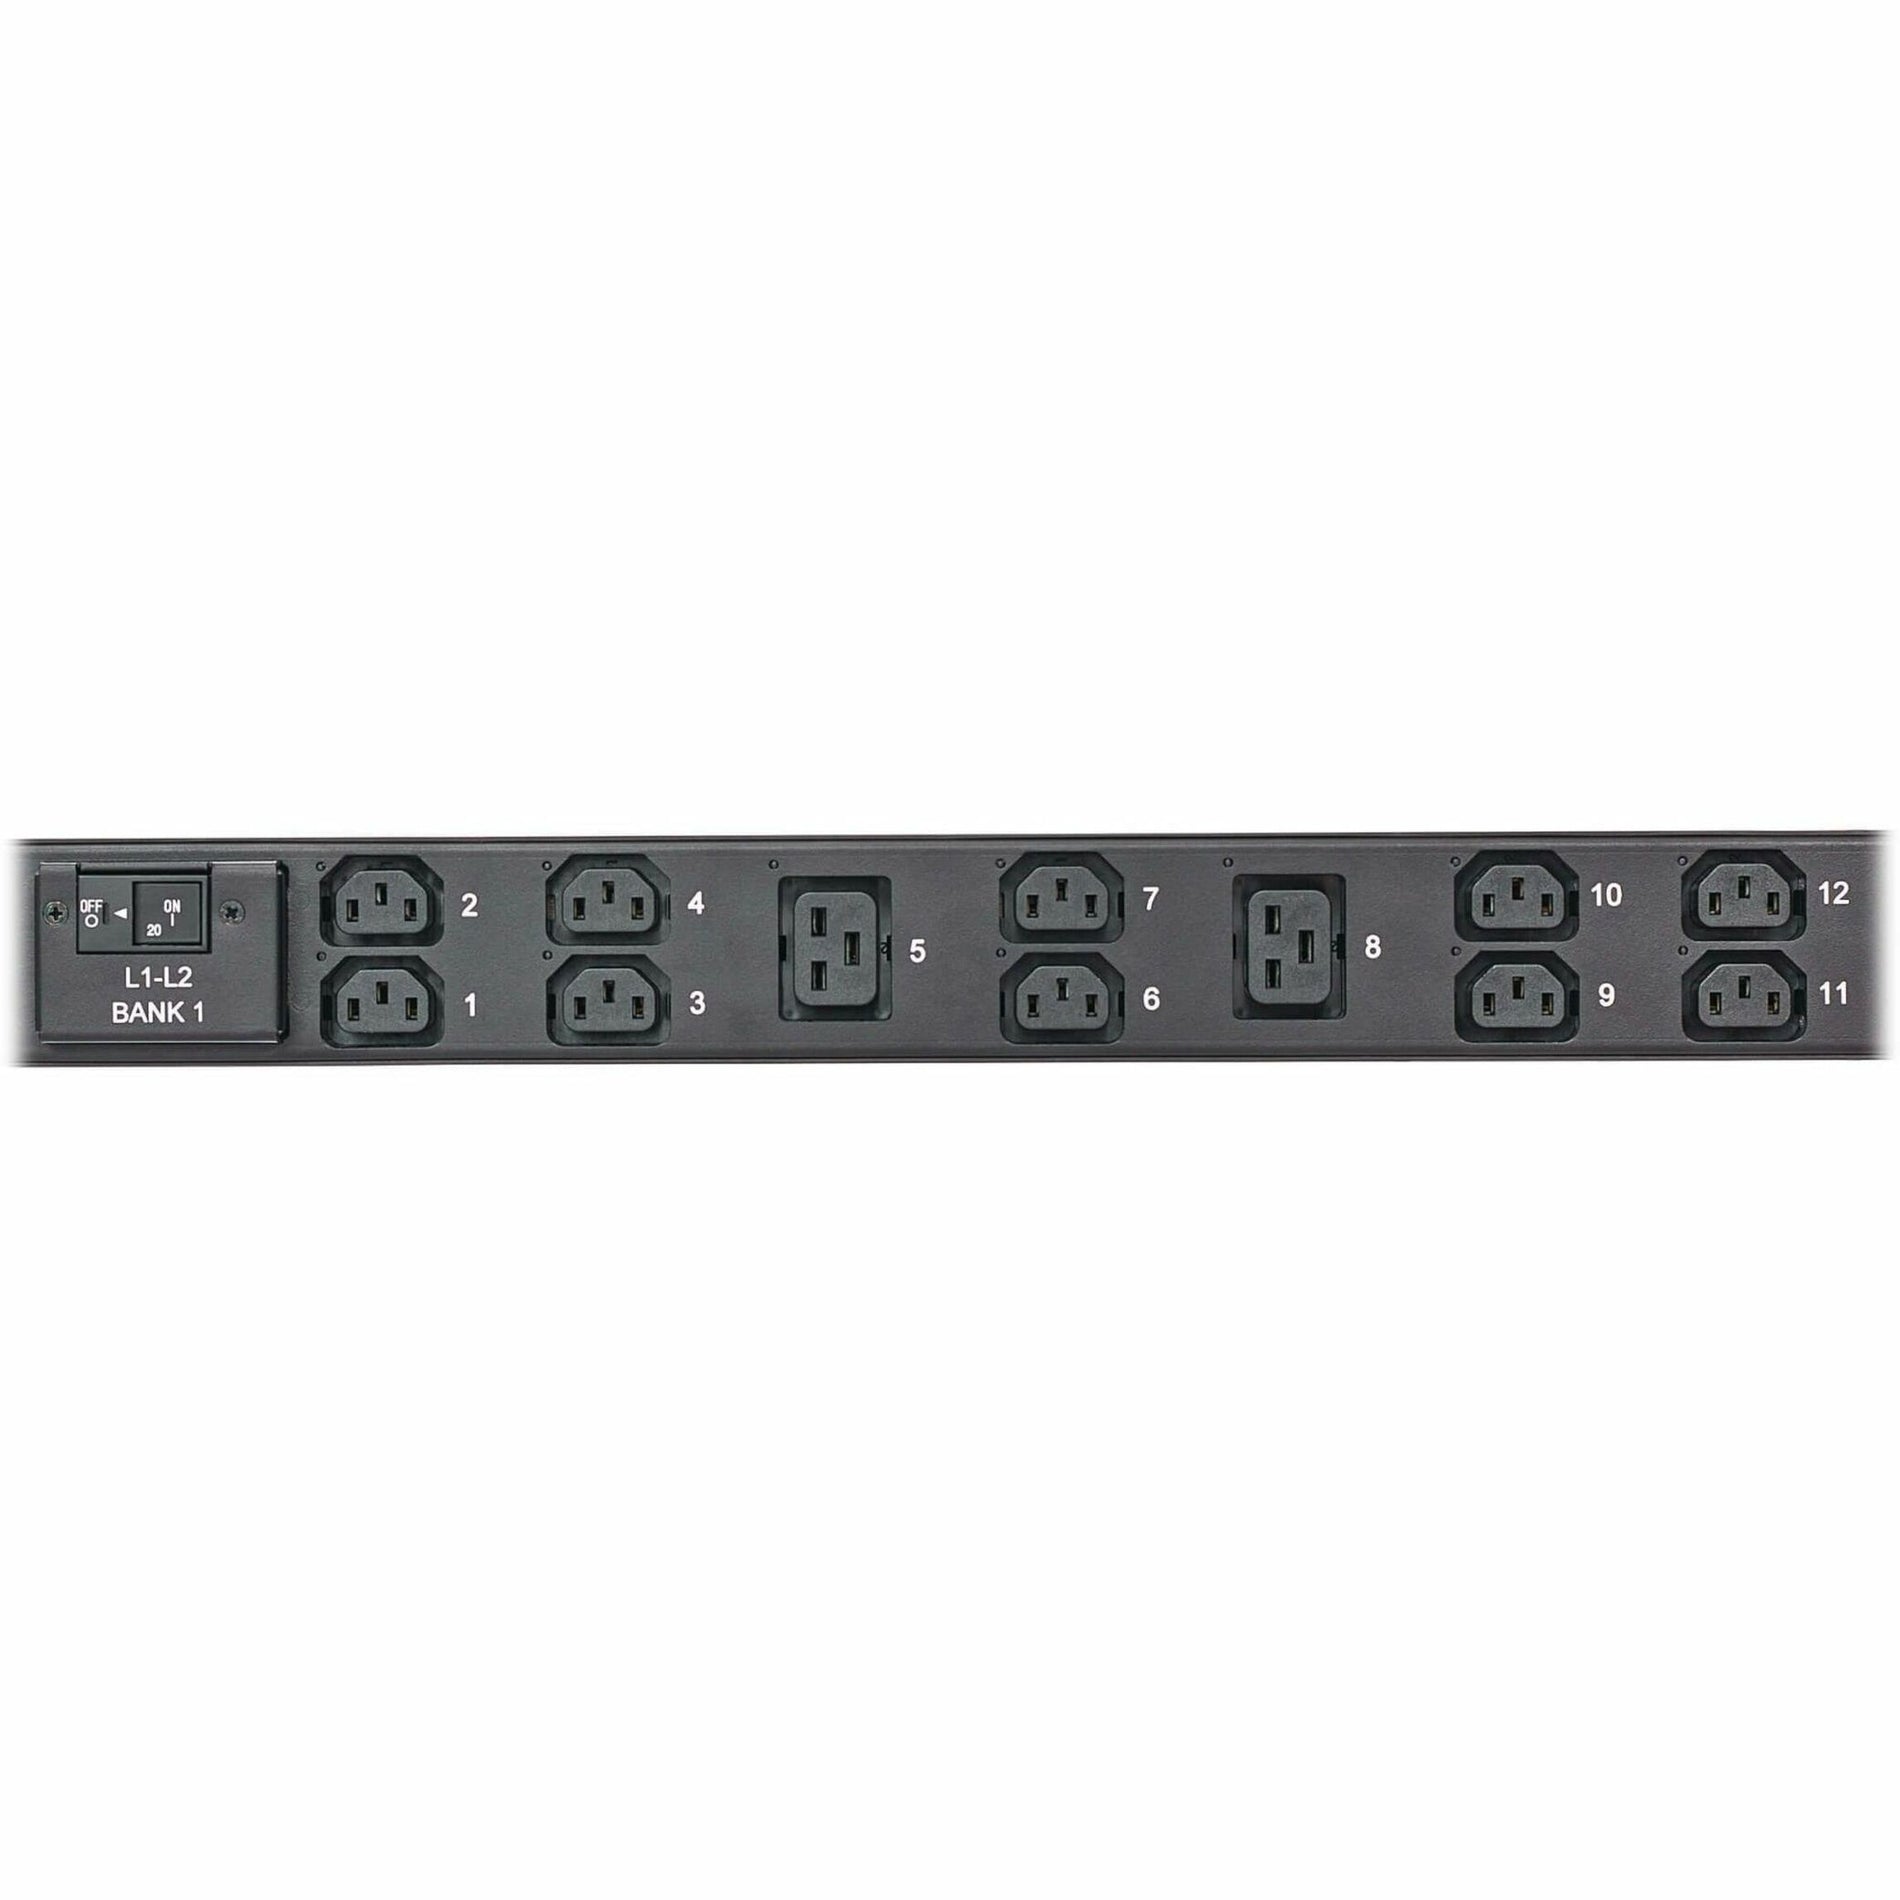 Tripp Lite PDU3EVSR1G60 36-Outlets PDU, 12.60 kW Power Rating, Managed, Switched, Overload Protection